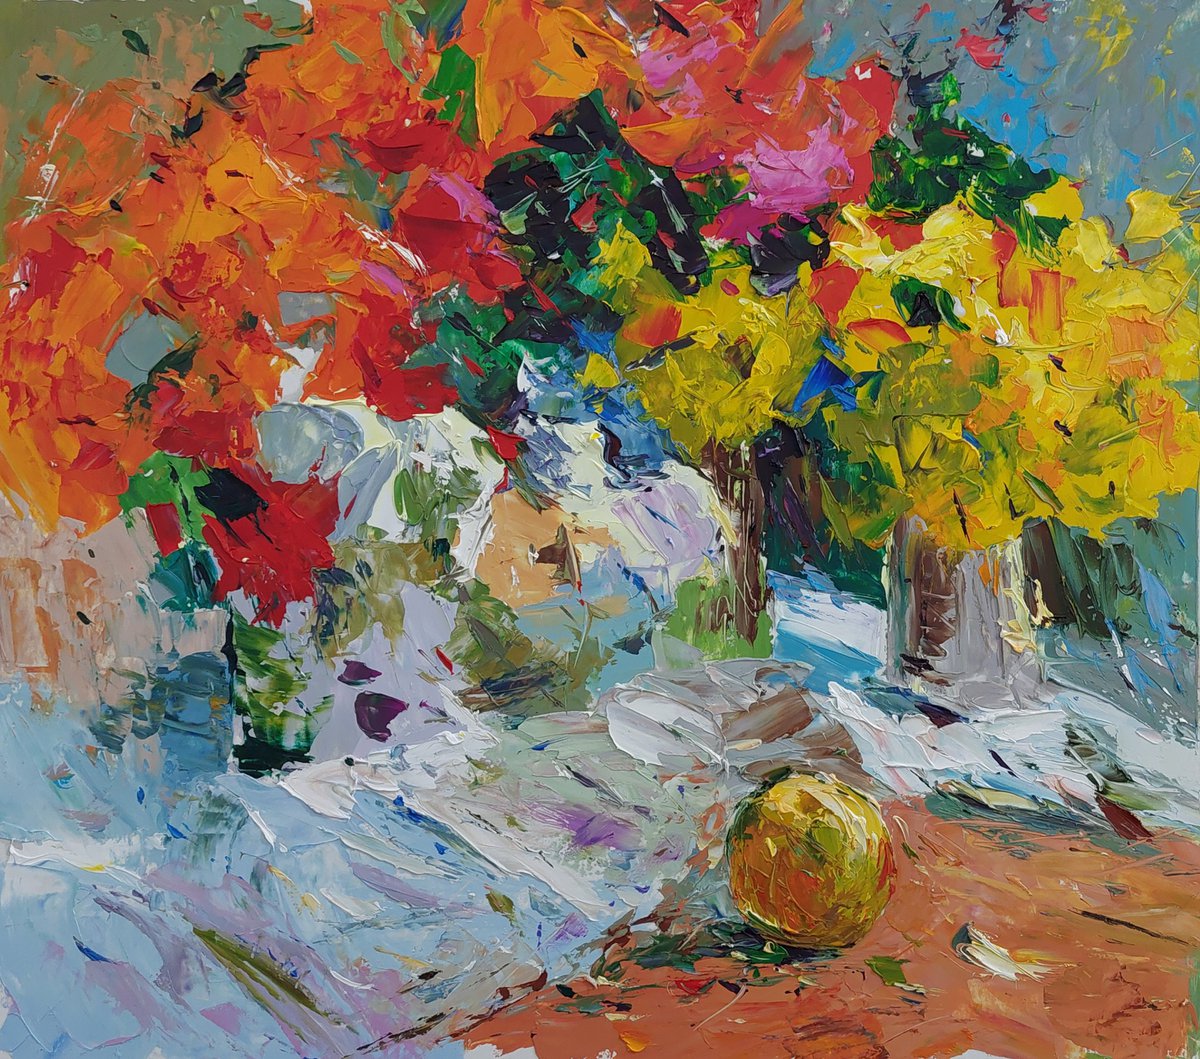 Abstract still life (43x49cm, oil on cardboard, palette knife) by Andranik Harutyunyan